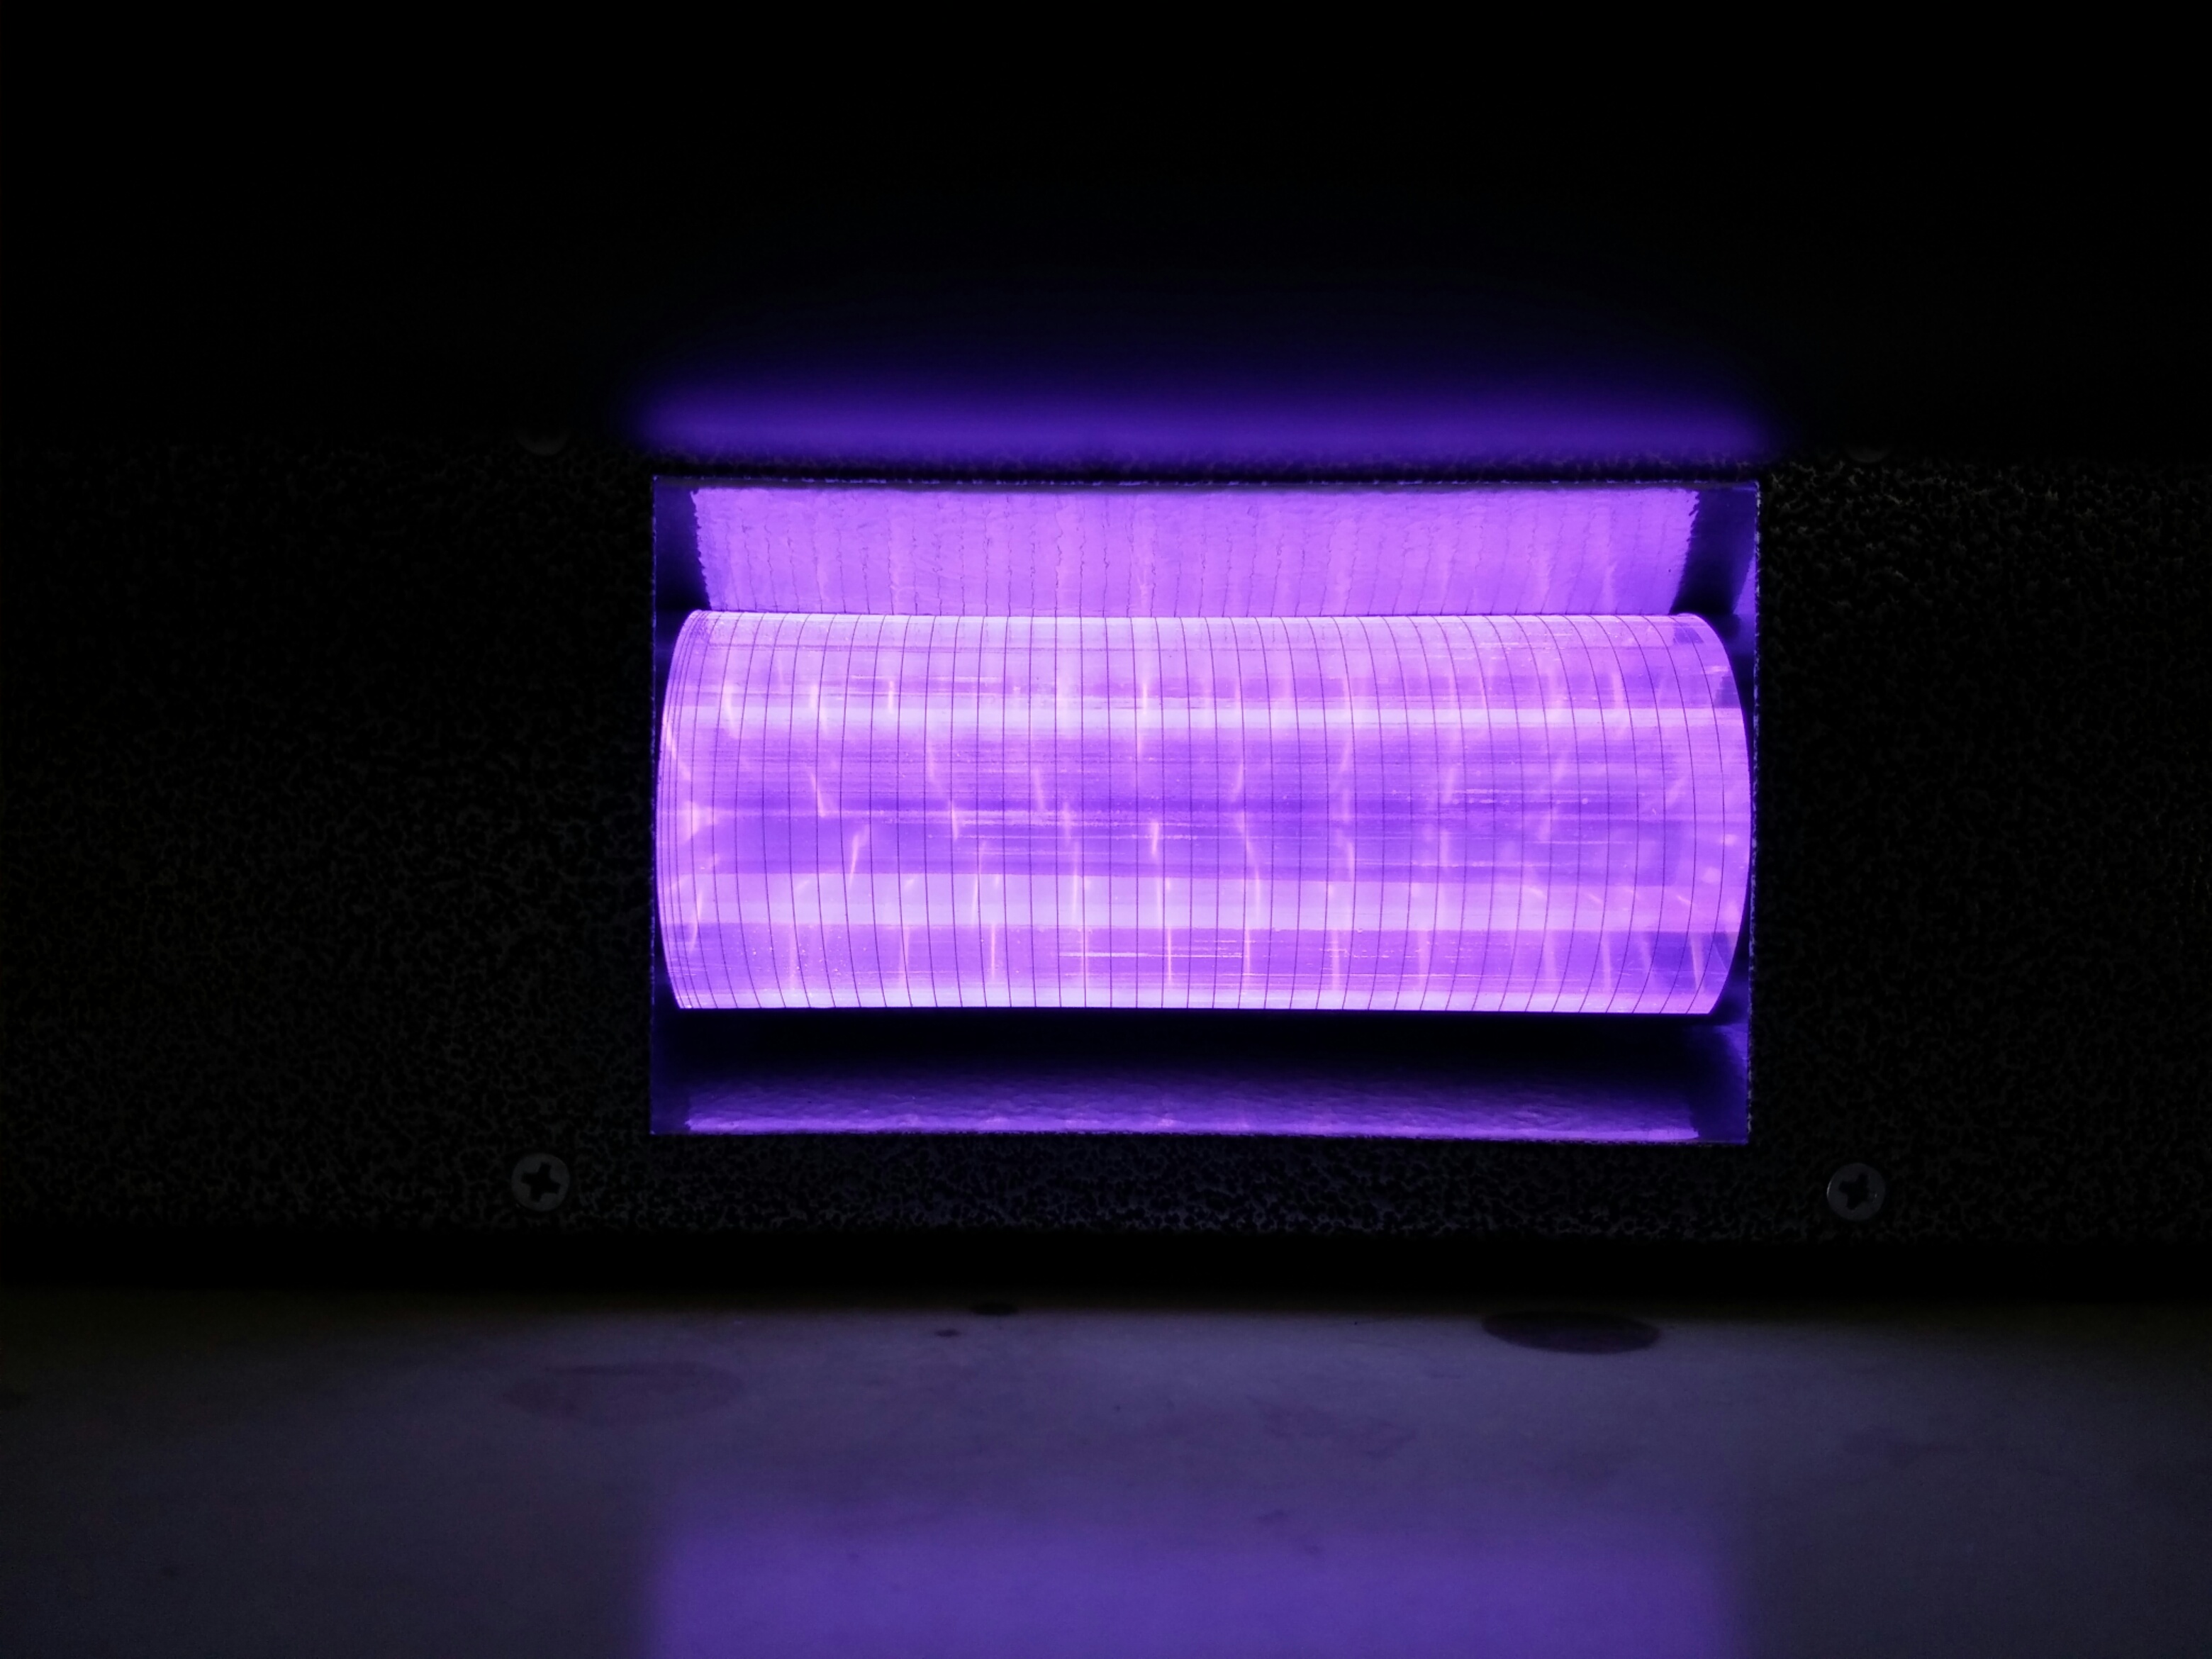 UV radiation from specially developed excimer plasma lamps can inactivate bacteria and even spores.